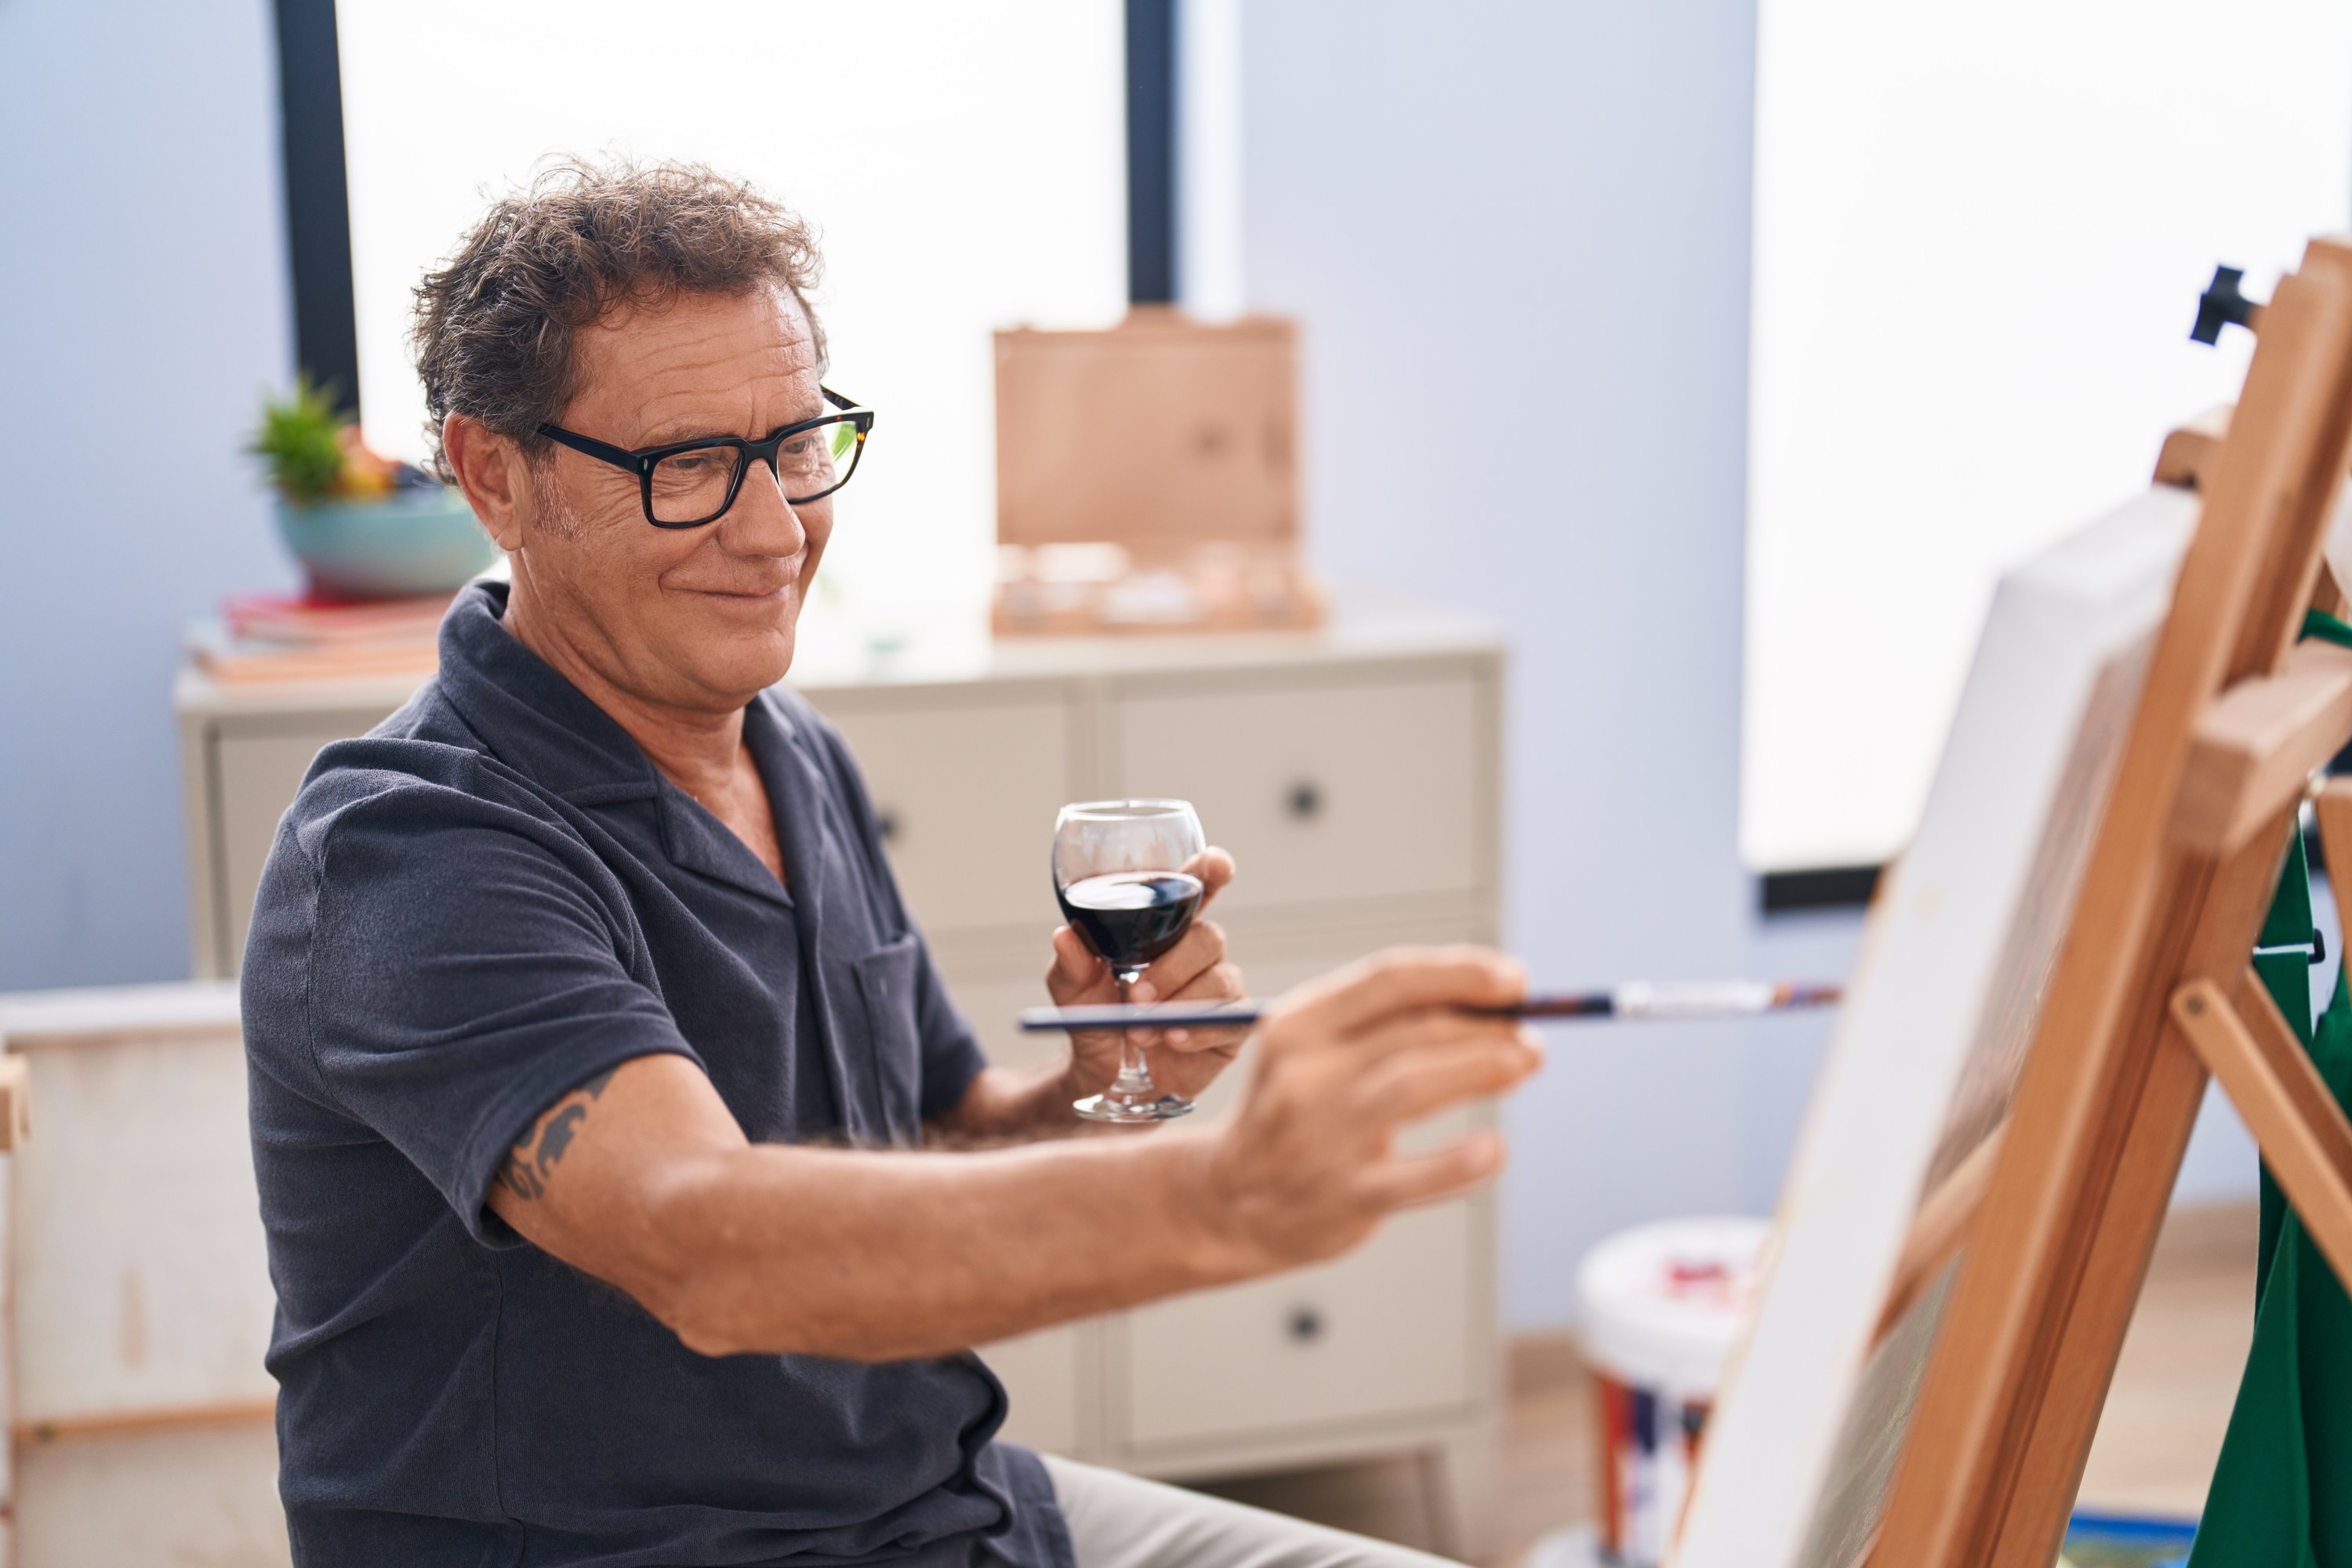 A person drinking wine and painting